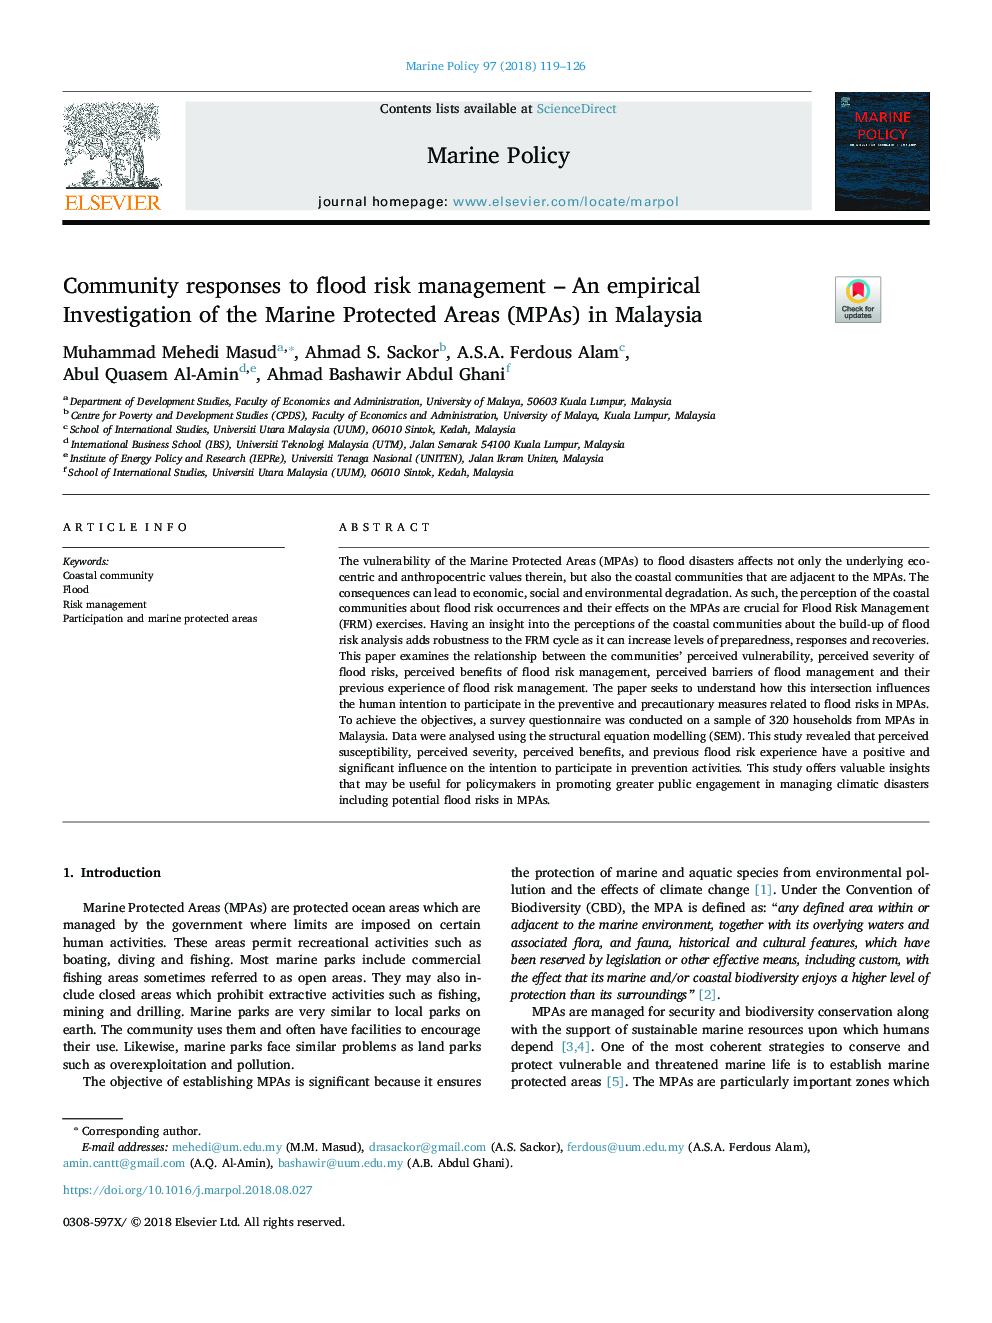 Community responses to flood risk management - An empirical Investigation of the Marine Protected Areas (MPAs) in Malaysia